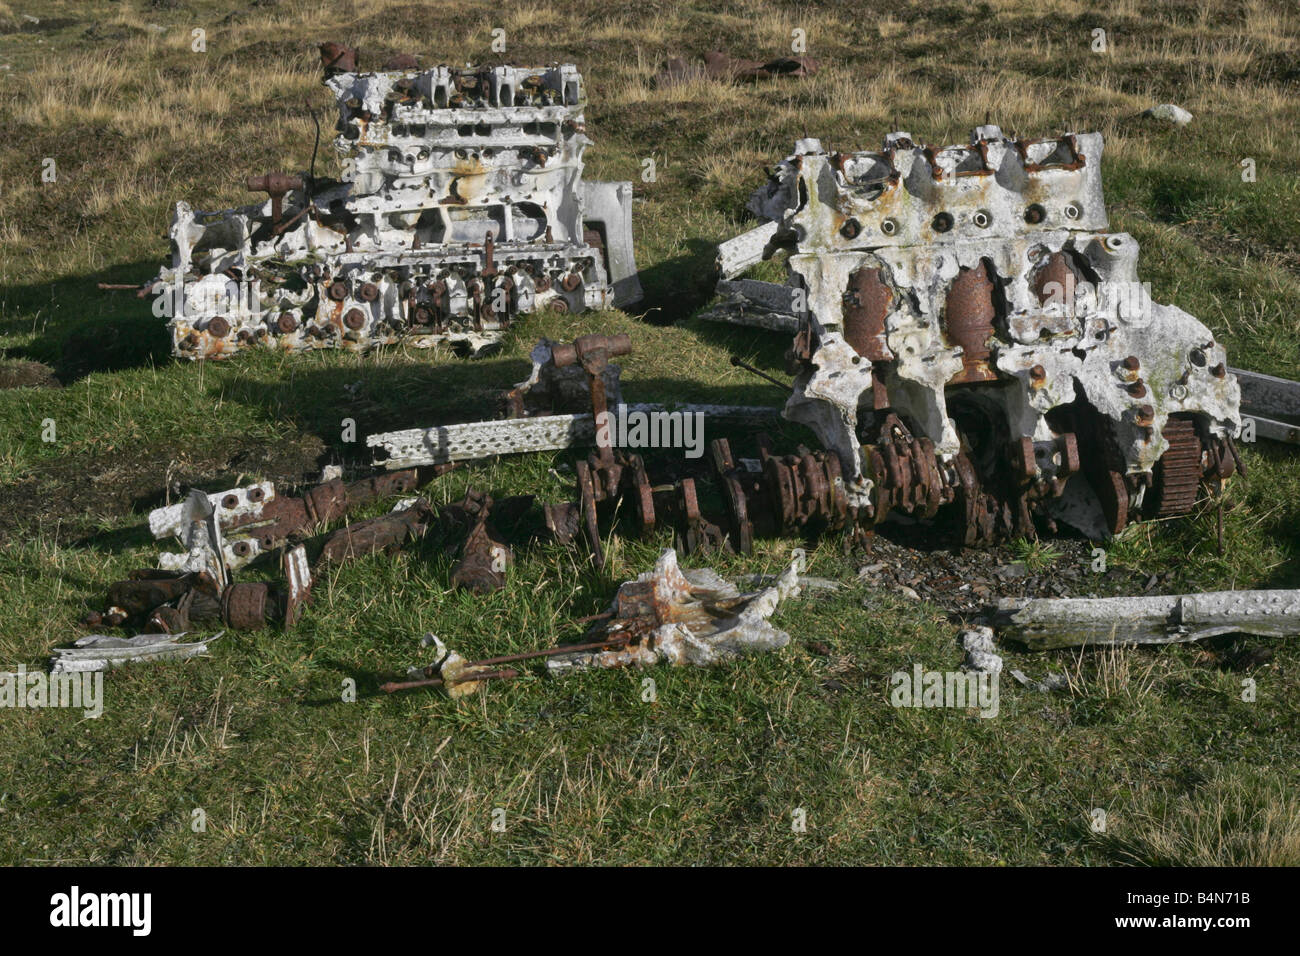 Remains of engines from a Heinkel He 111 German bomber on Fair Isle, Shetland.  The plane crashed on 17 January 1941. Stock Photo